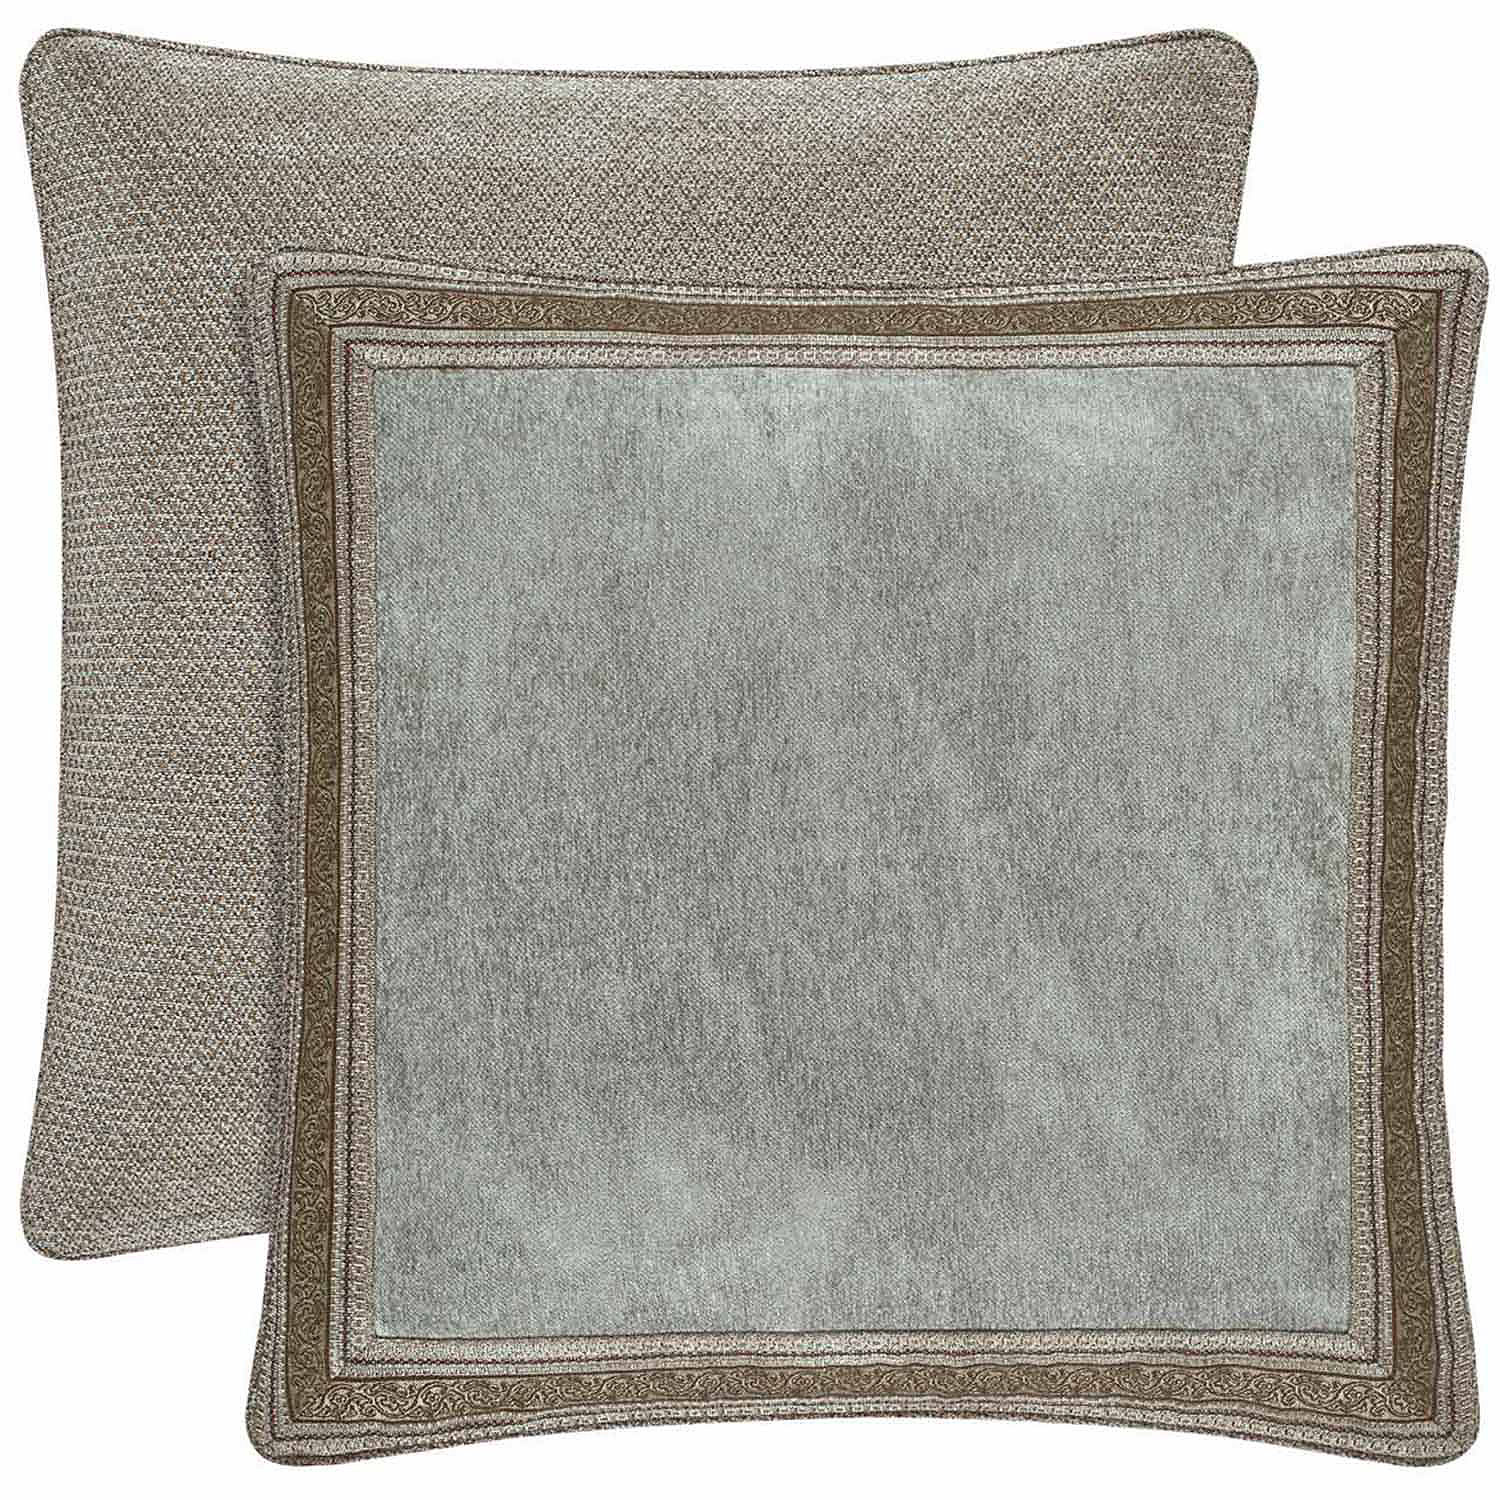 Queen Street Paulina Euro Sham Color Stone Jcpenney